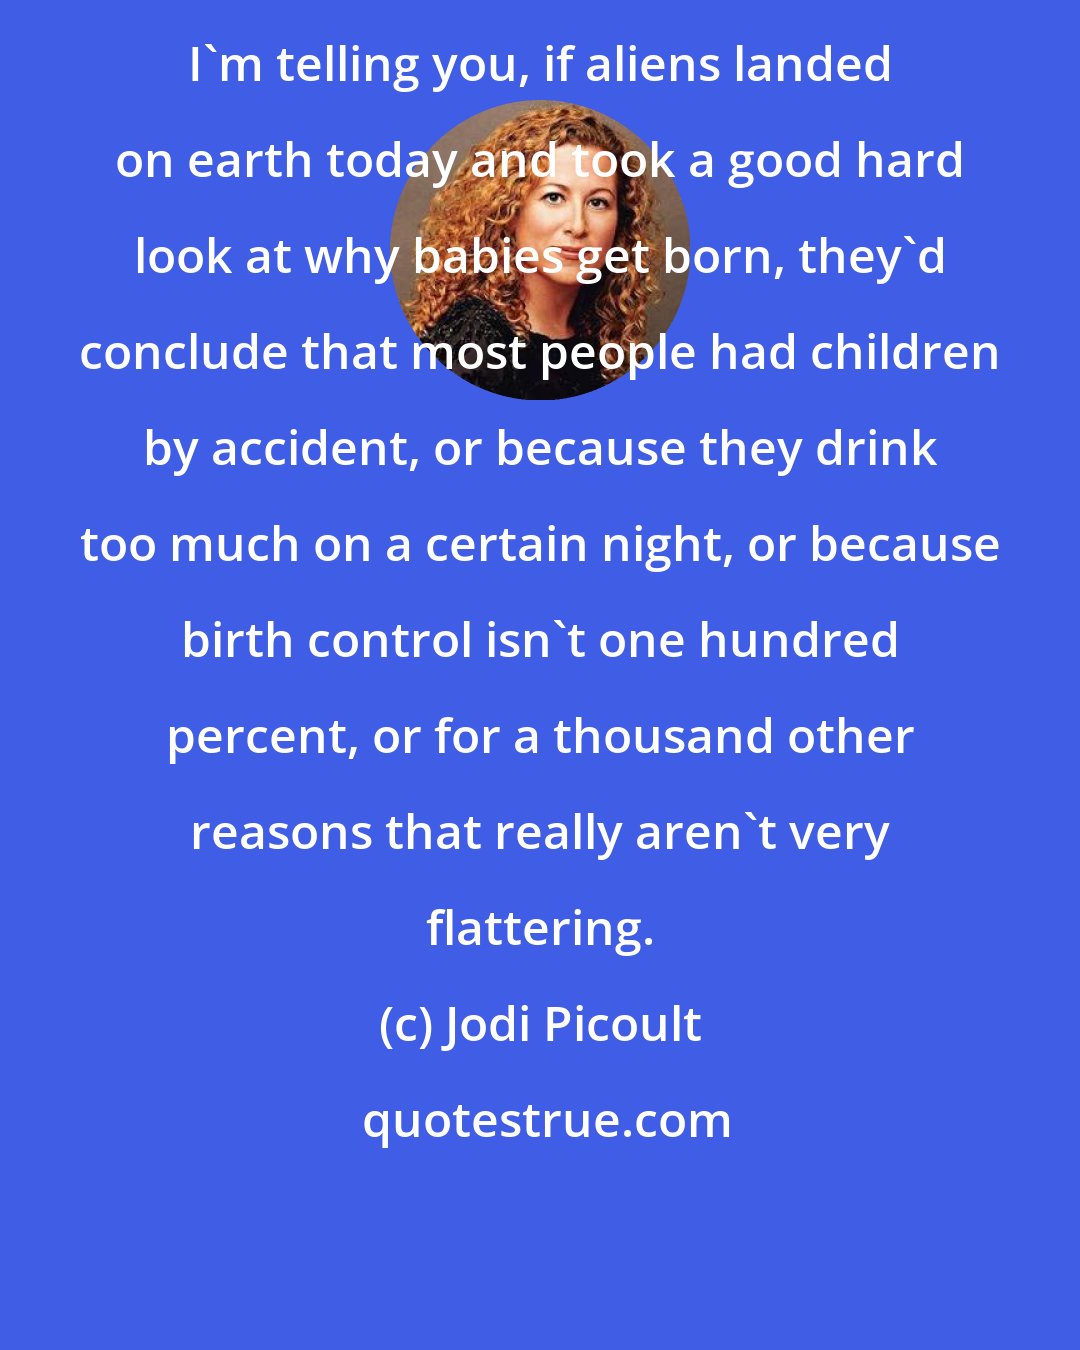 Jodi Picoult: I'm telling you, if aliens landed on earth today and took a good hard look at why babies get born, they'd conclude that most people had children by accident, or because they drink too much on a certain night, or because birth control isn't one hundred percent, or for a thousand other reasons that really aren't very flattering.